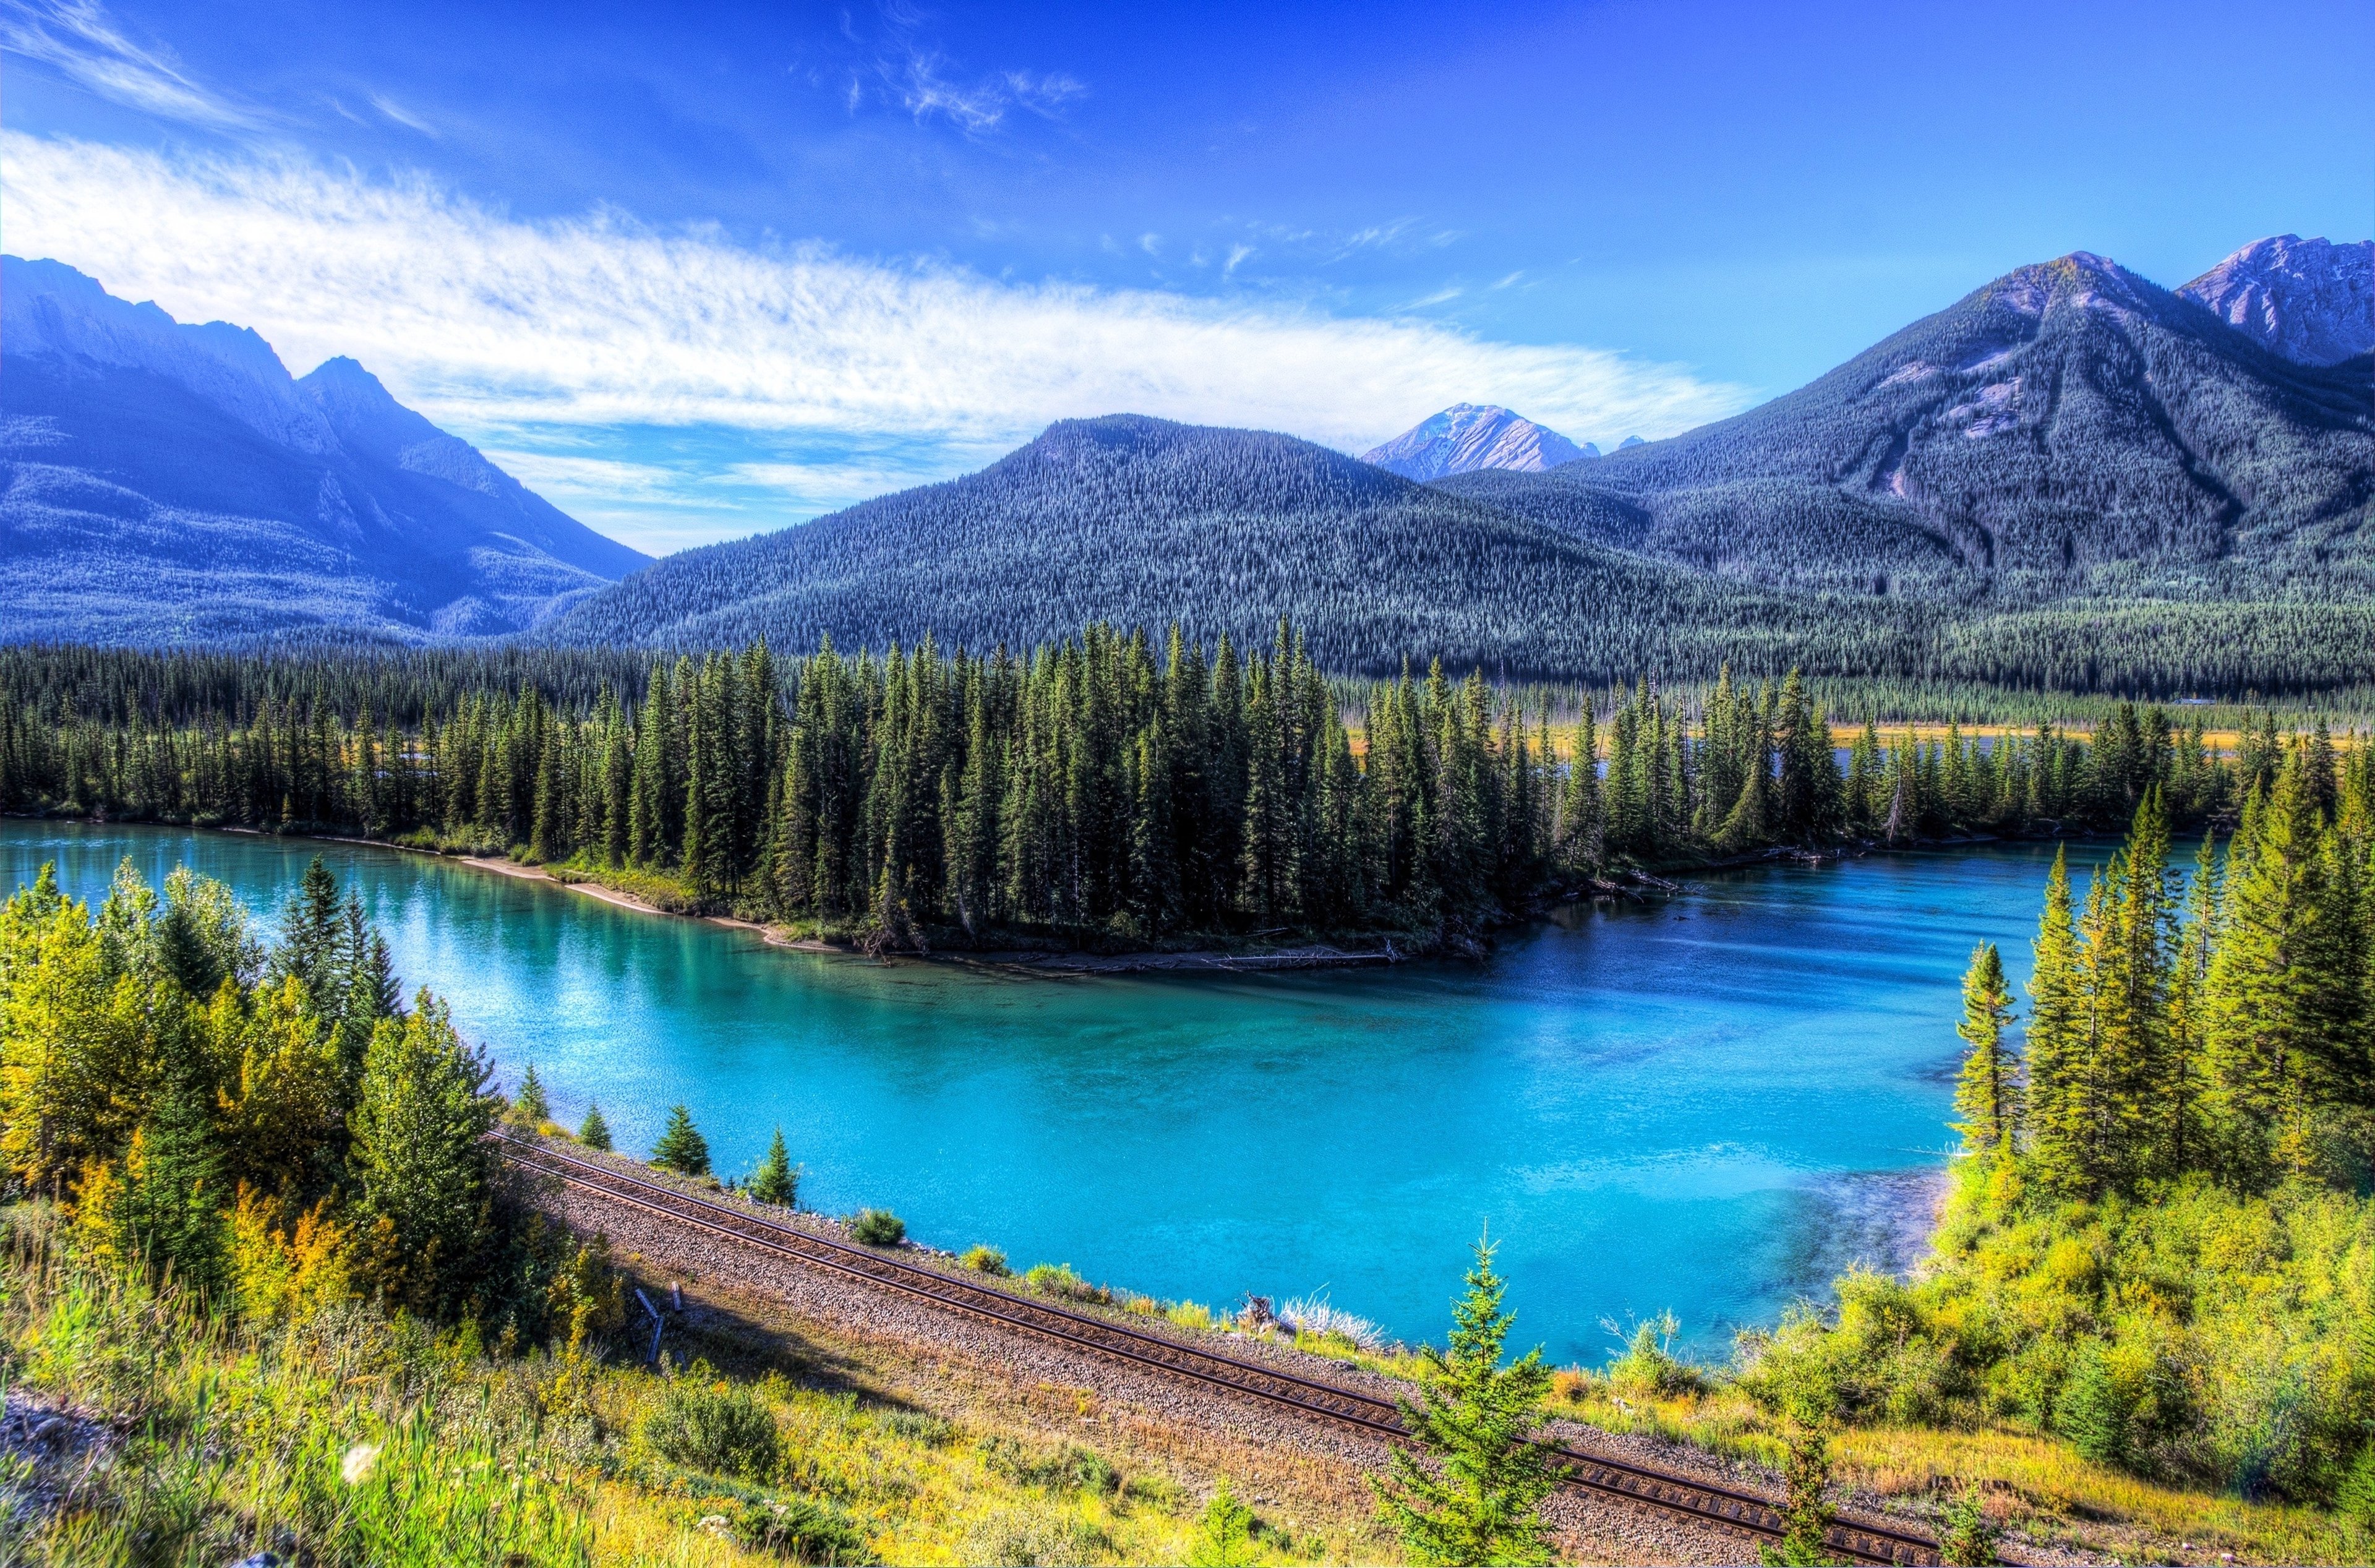 landscapes, Lakes, Mountains, Stones, Trees, Forest, Green, Snow, Sky, Clouds, Blue, Nature, Beauty, Relax, Quiet, Railroad Wallpaper